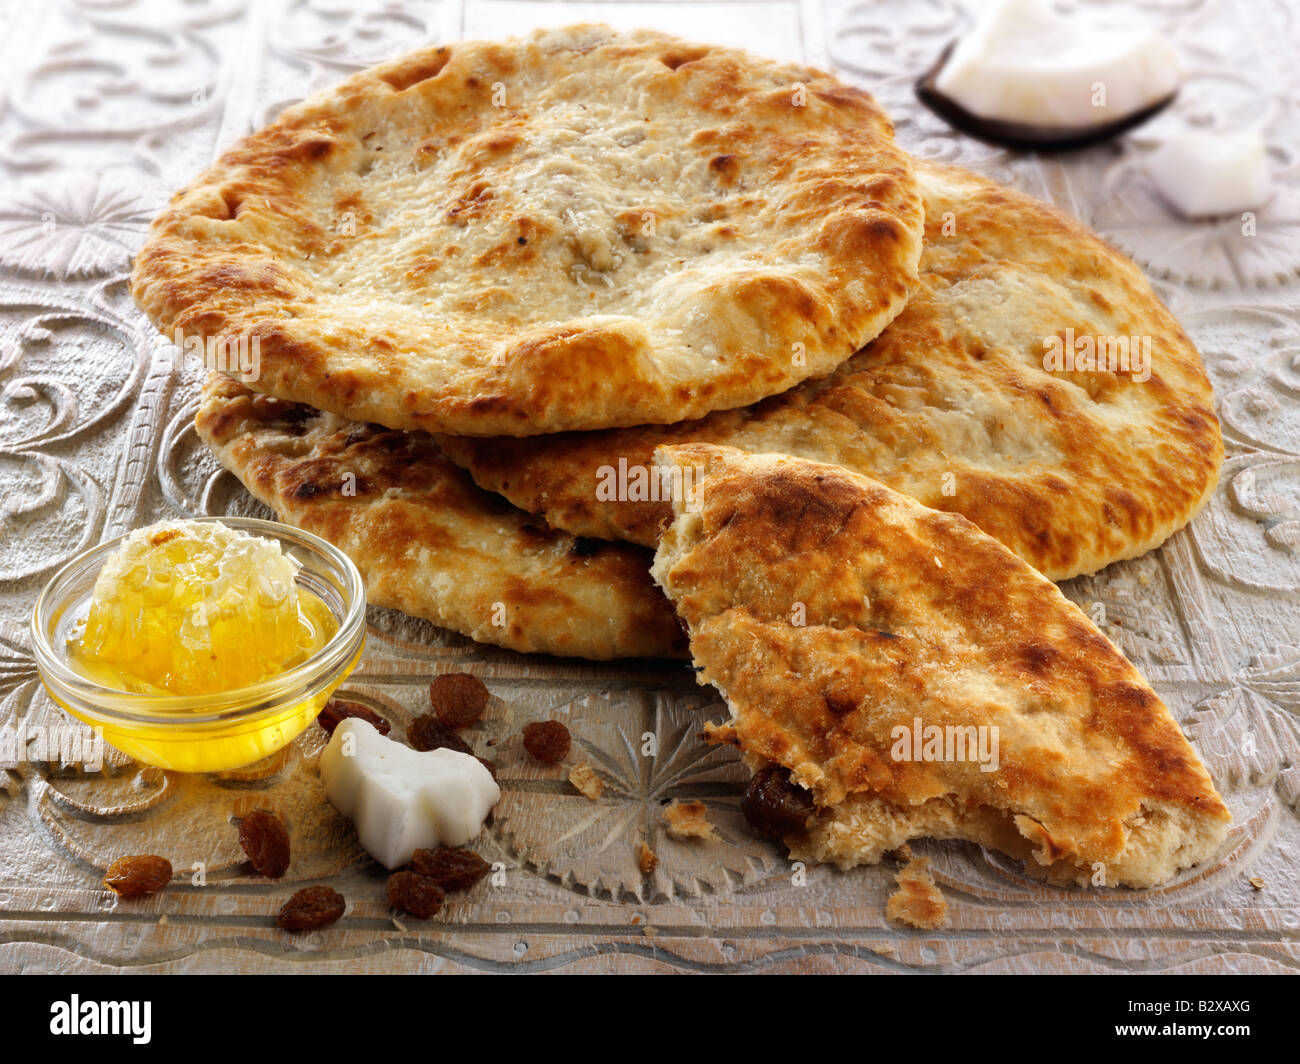 Peshwari Naan. coconut sultanas and honey Bread served ready to eat on a table - Indian Cuisine Stock Photo